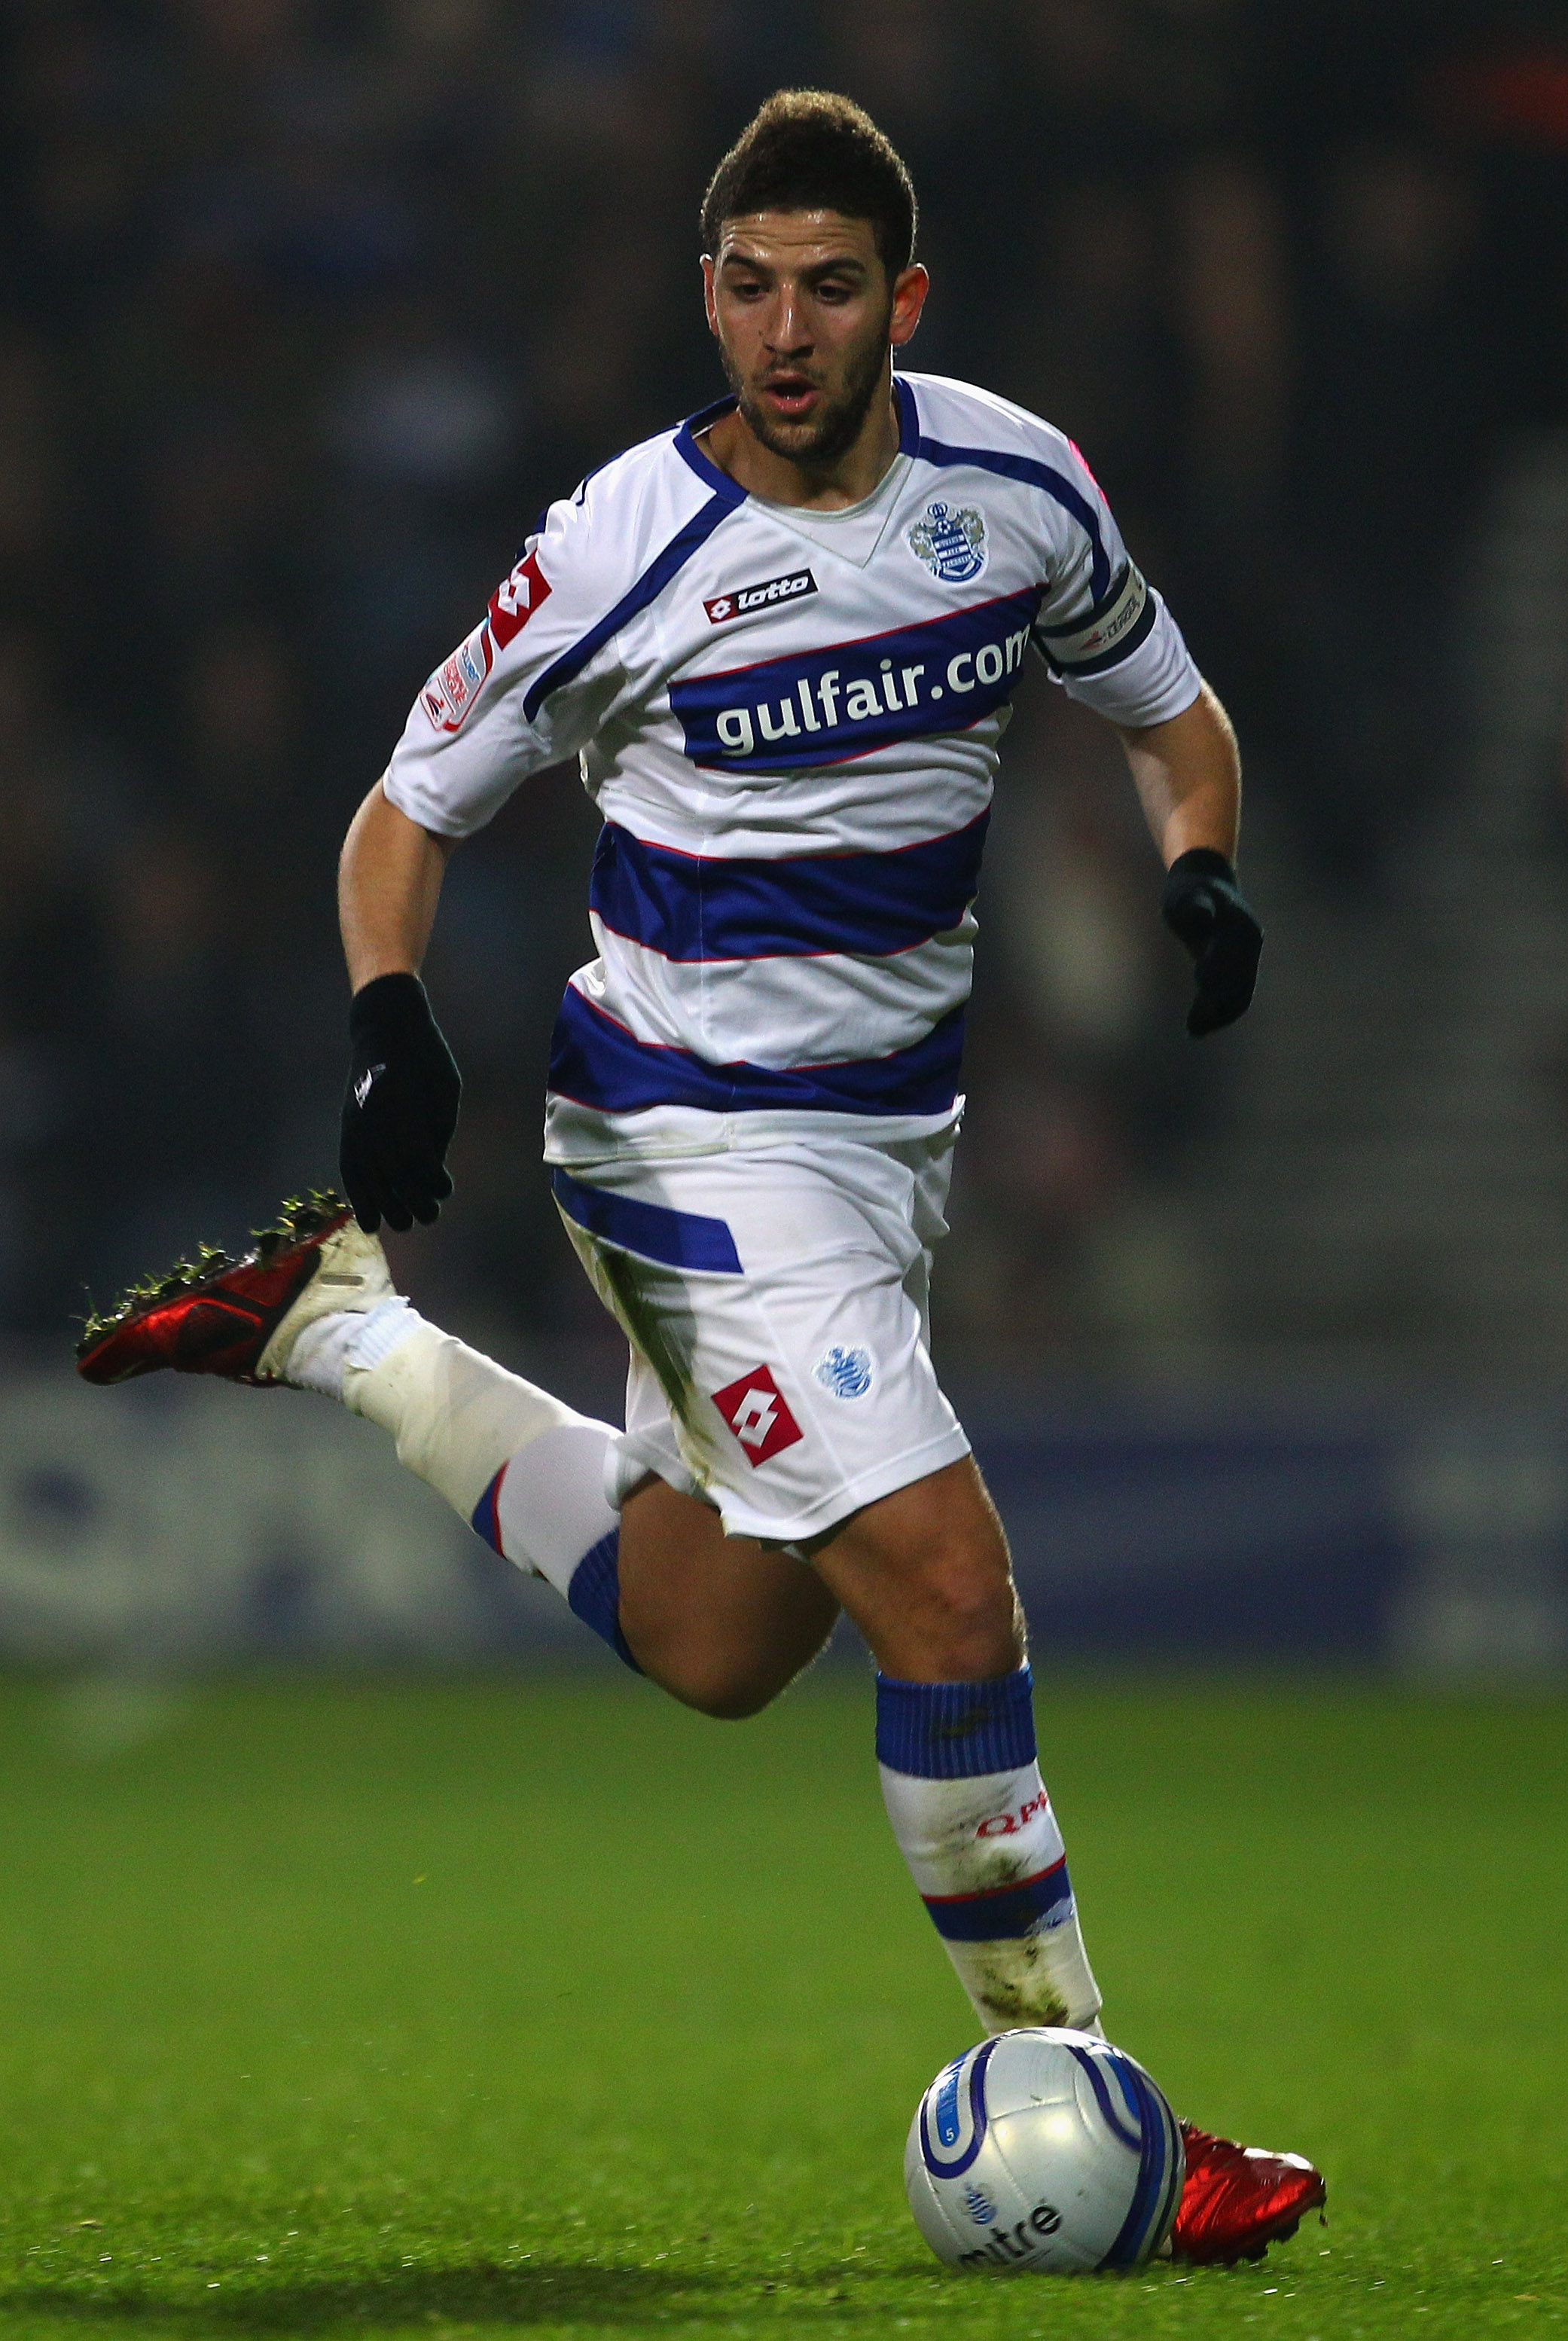 LONDON, ENGLAND - FEBRUARY 22:  Adel Taarabt of QPR in action during the npower Championship match between Queens Park Rangers and Ipswich Town at Loftus Road on February 22, 2011 in London, England.  (Photo by Julian Finney/Getty Images)